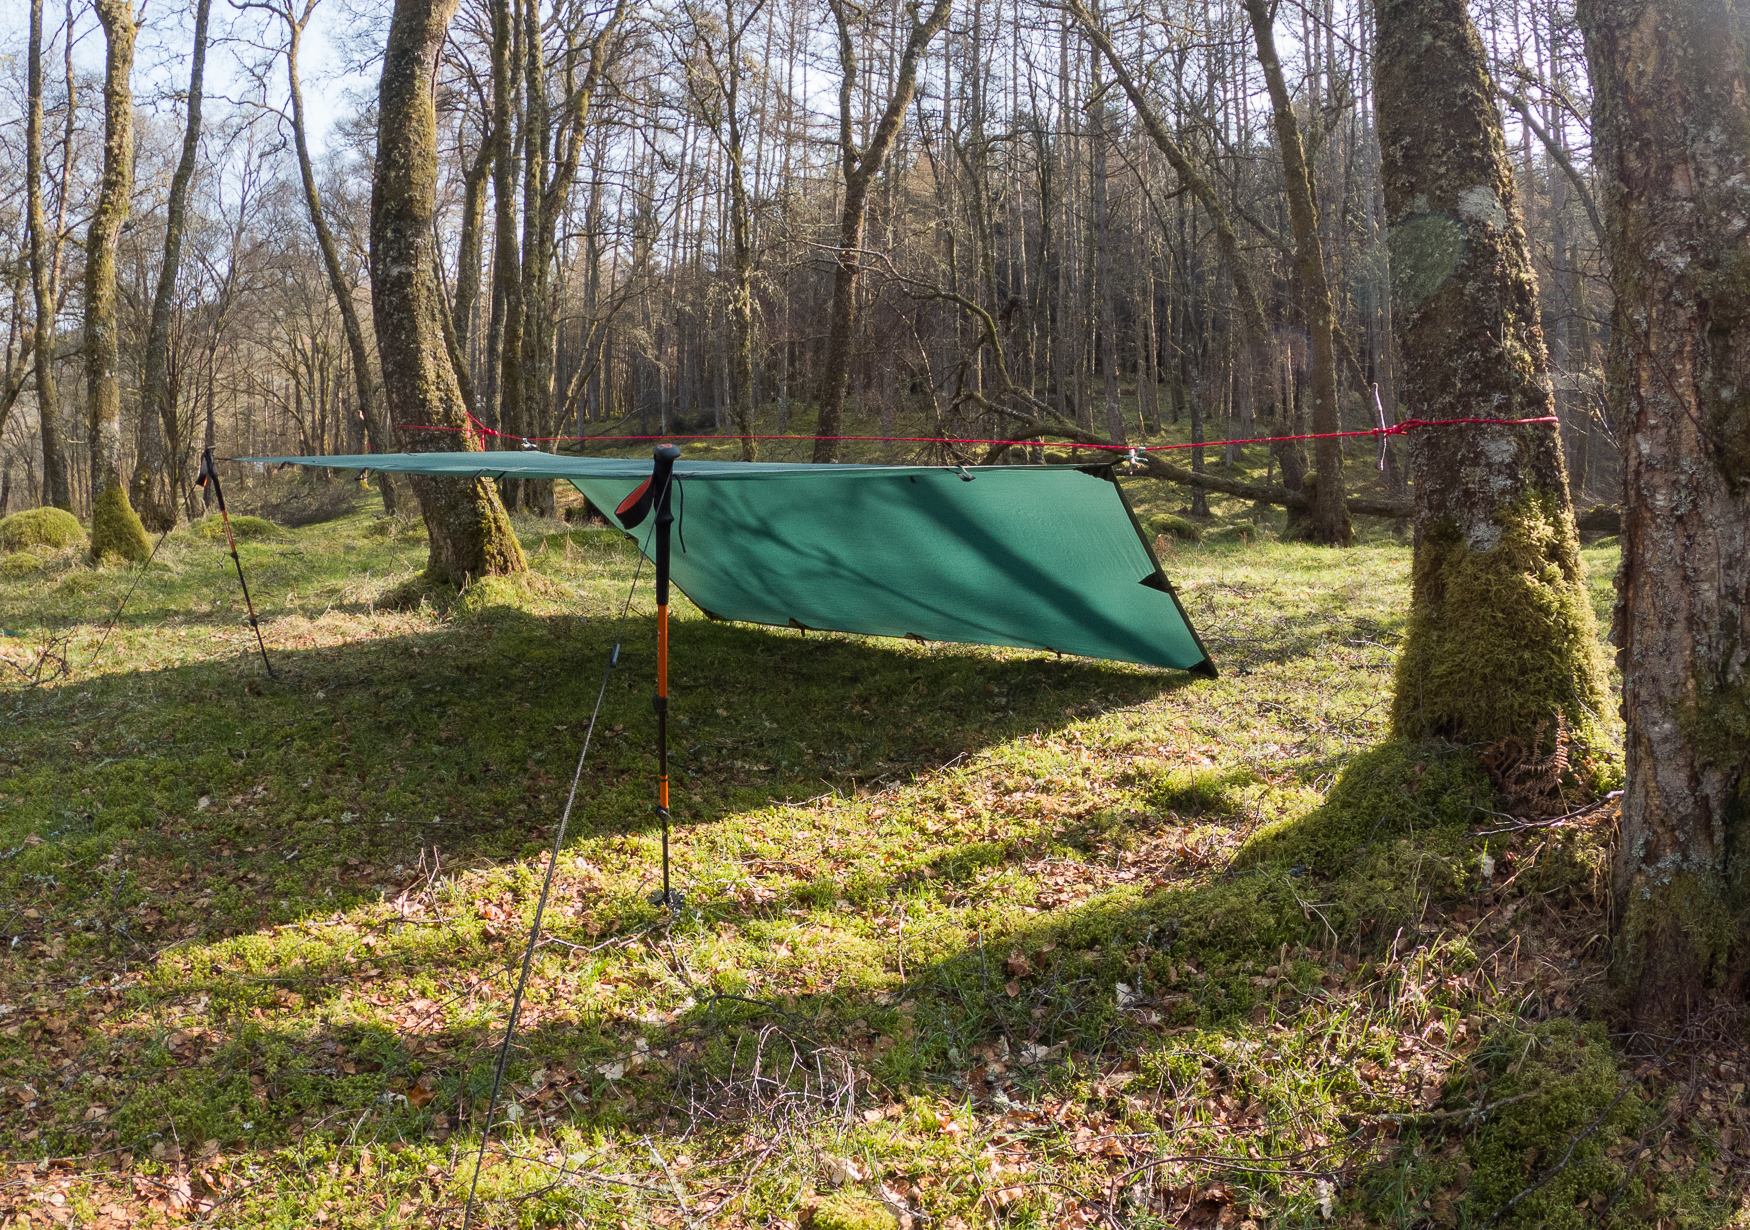 5 creative to use your tarp to stay camping this spring - The Manual